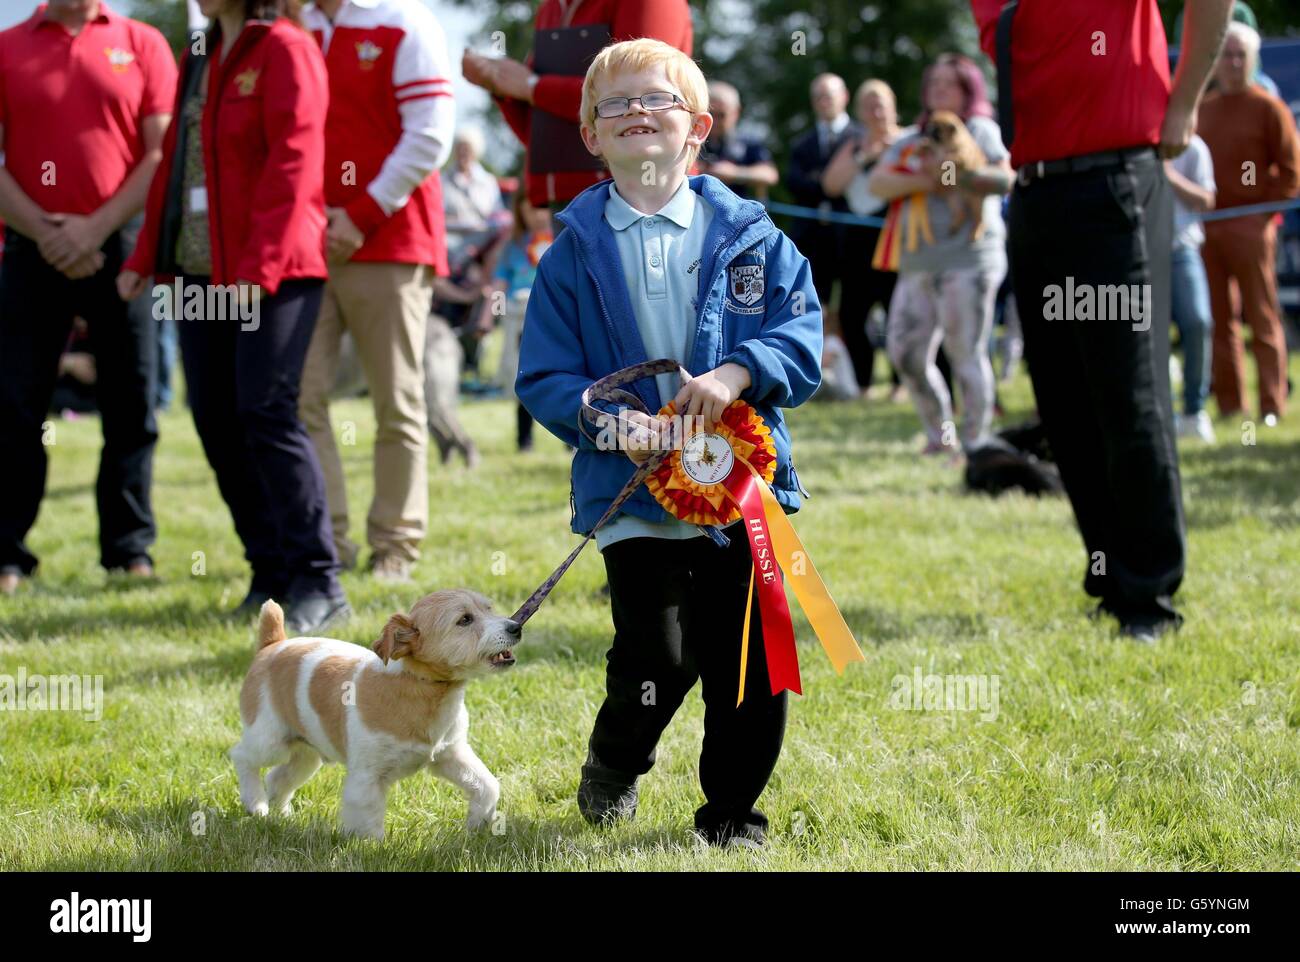 Daniel Little, 8, with his dog Oliver after they won the Best in Show award at the Dumfries House Dog Show in the grounds of Dumfries House, Cumnock, Ayrshire. Stock Photo